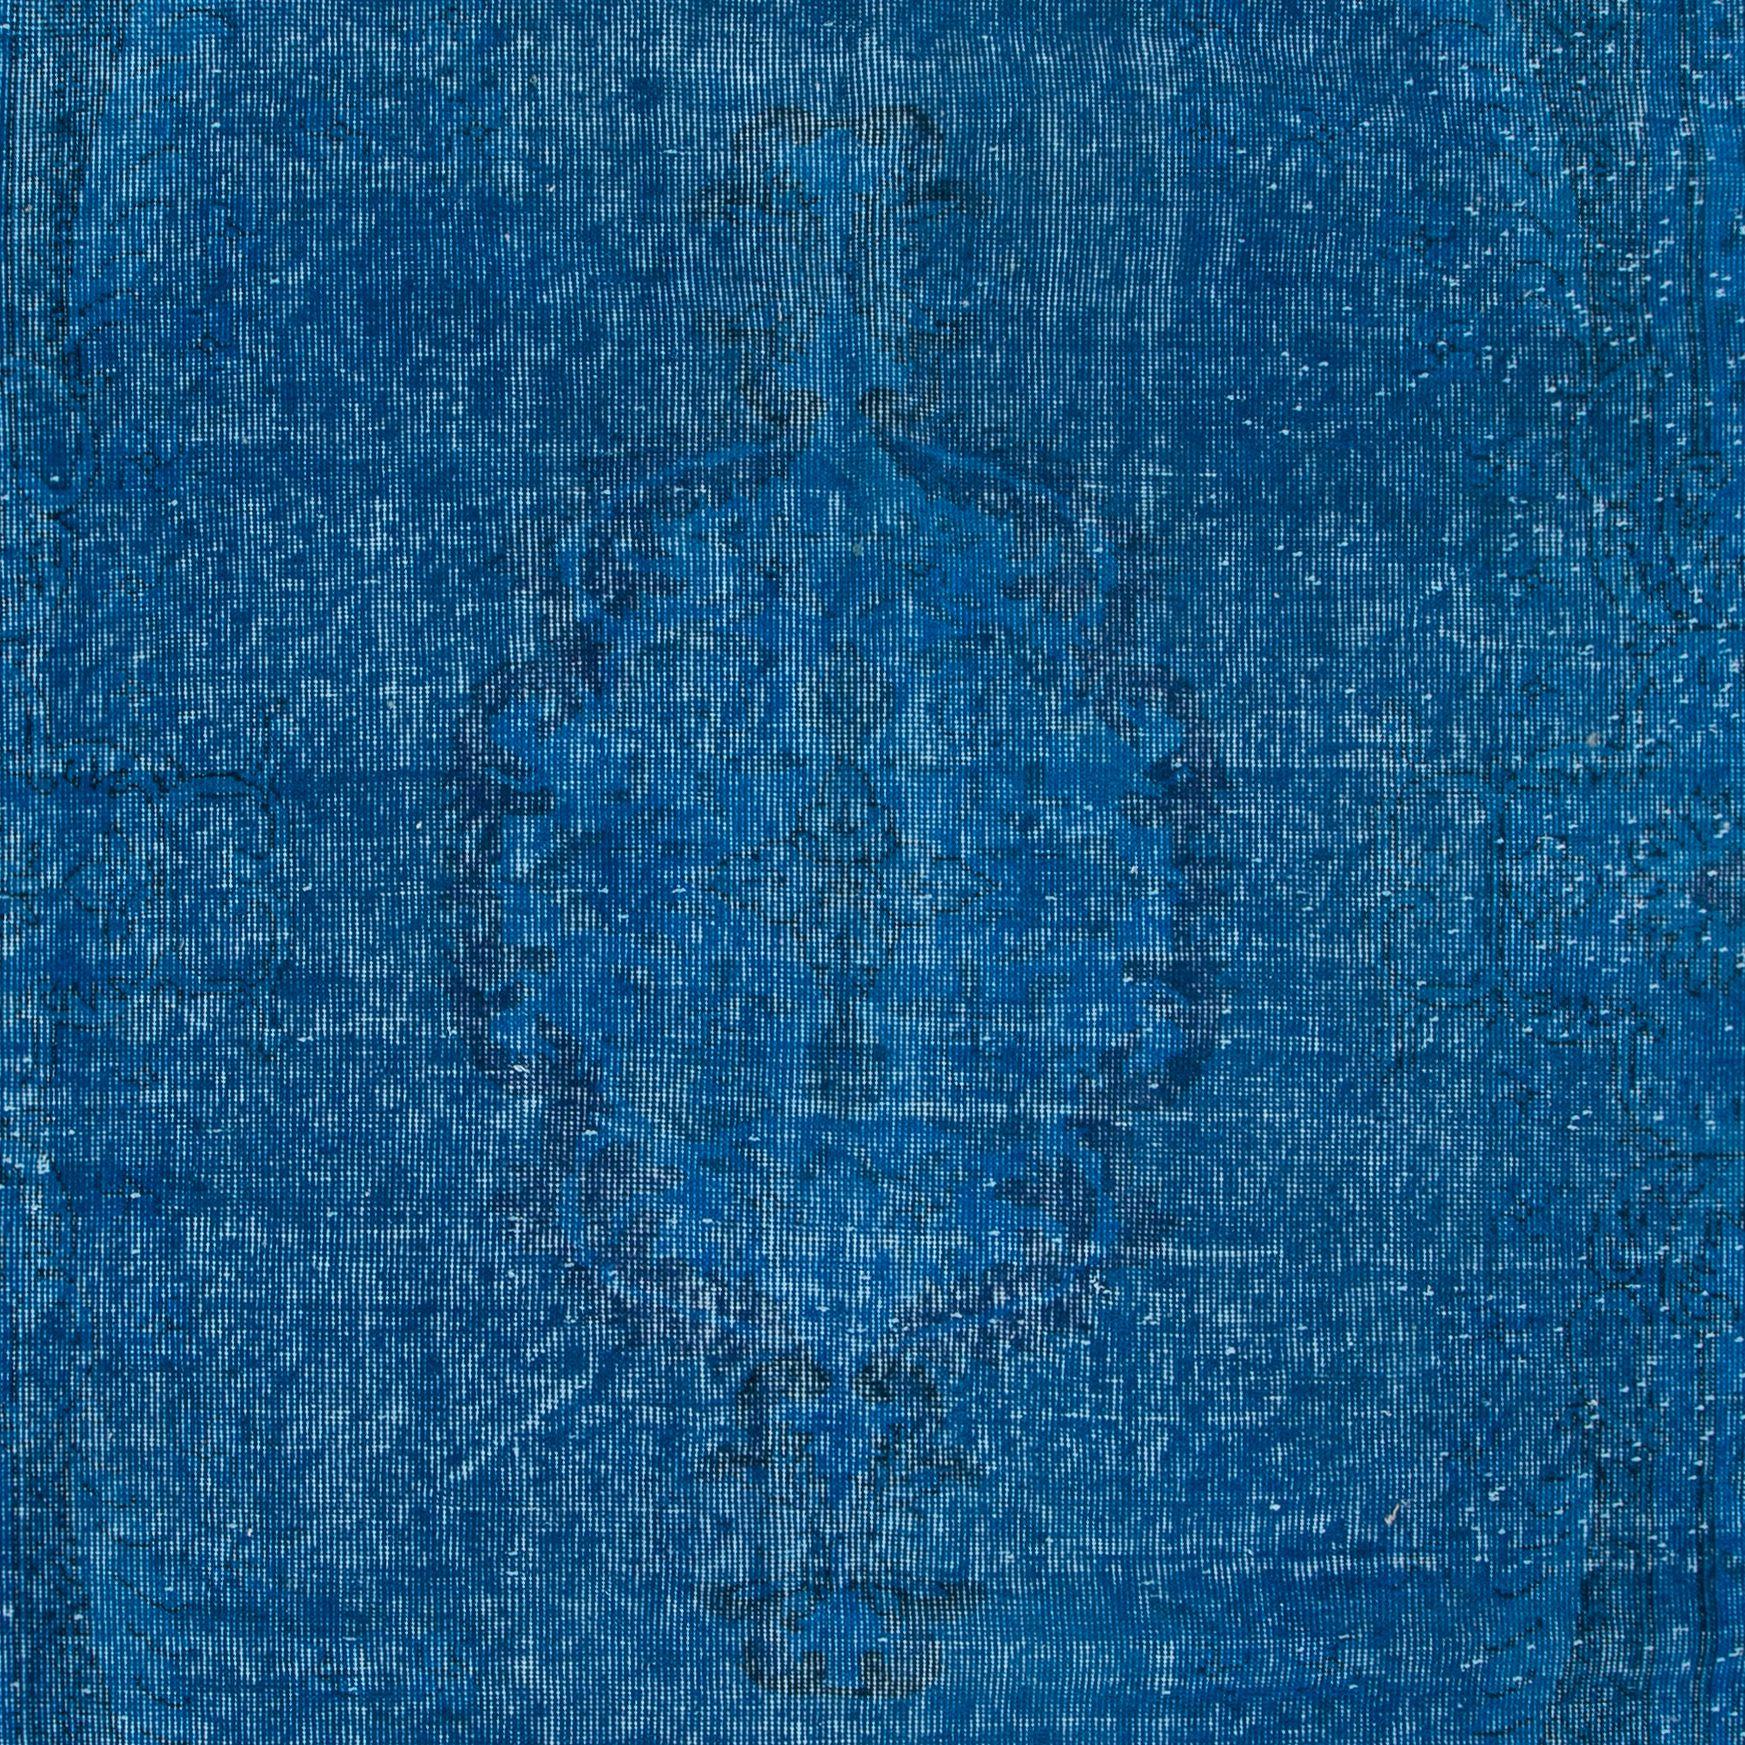 Turkish 6x9 Ft Modern Blue Area Rug made of wool and cotton, Hand-Knotted in Turkey For Sale